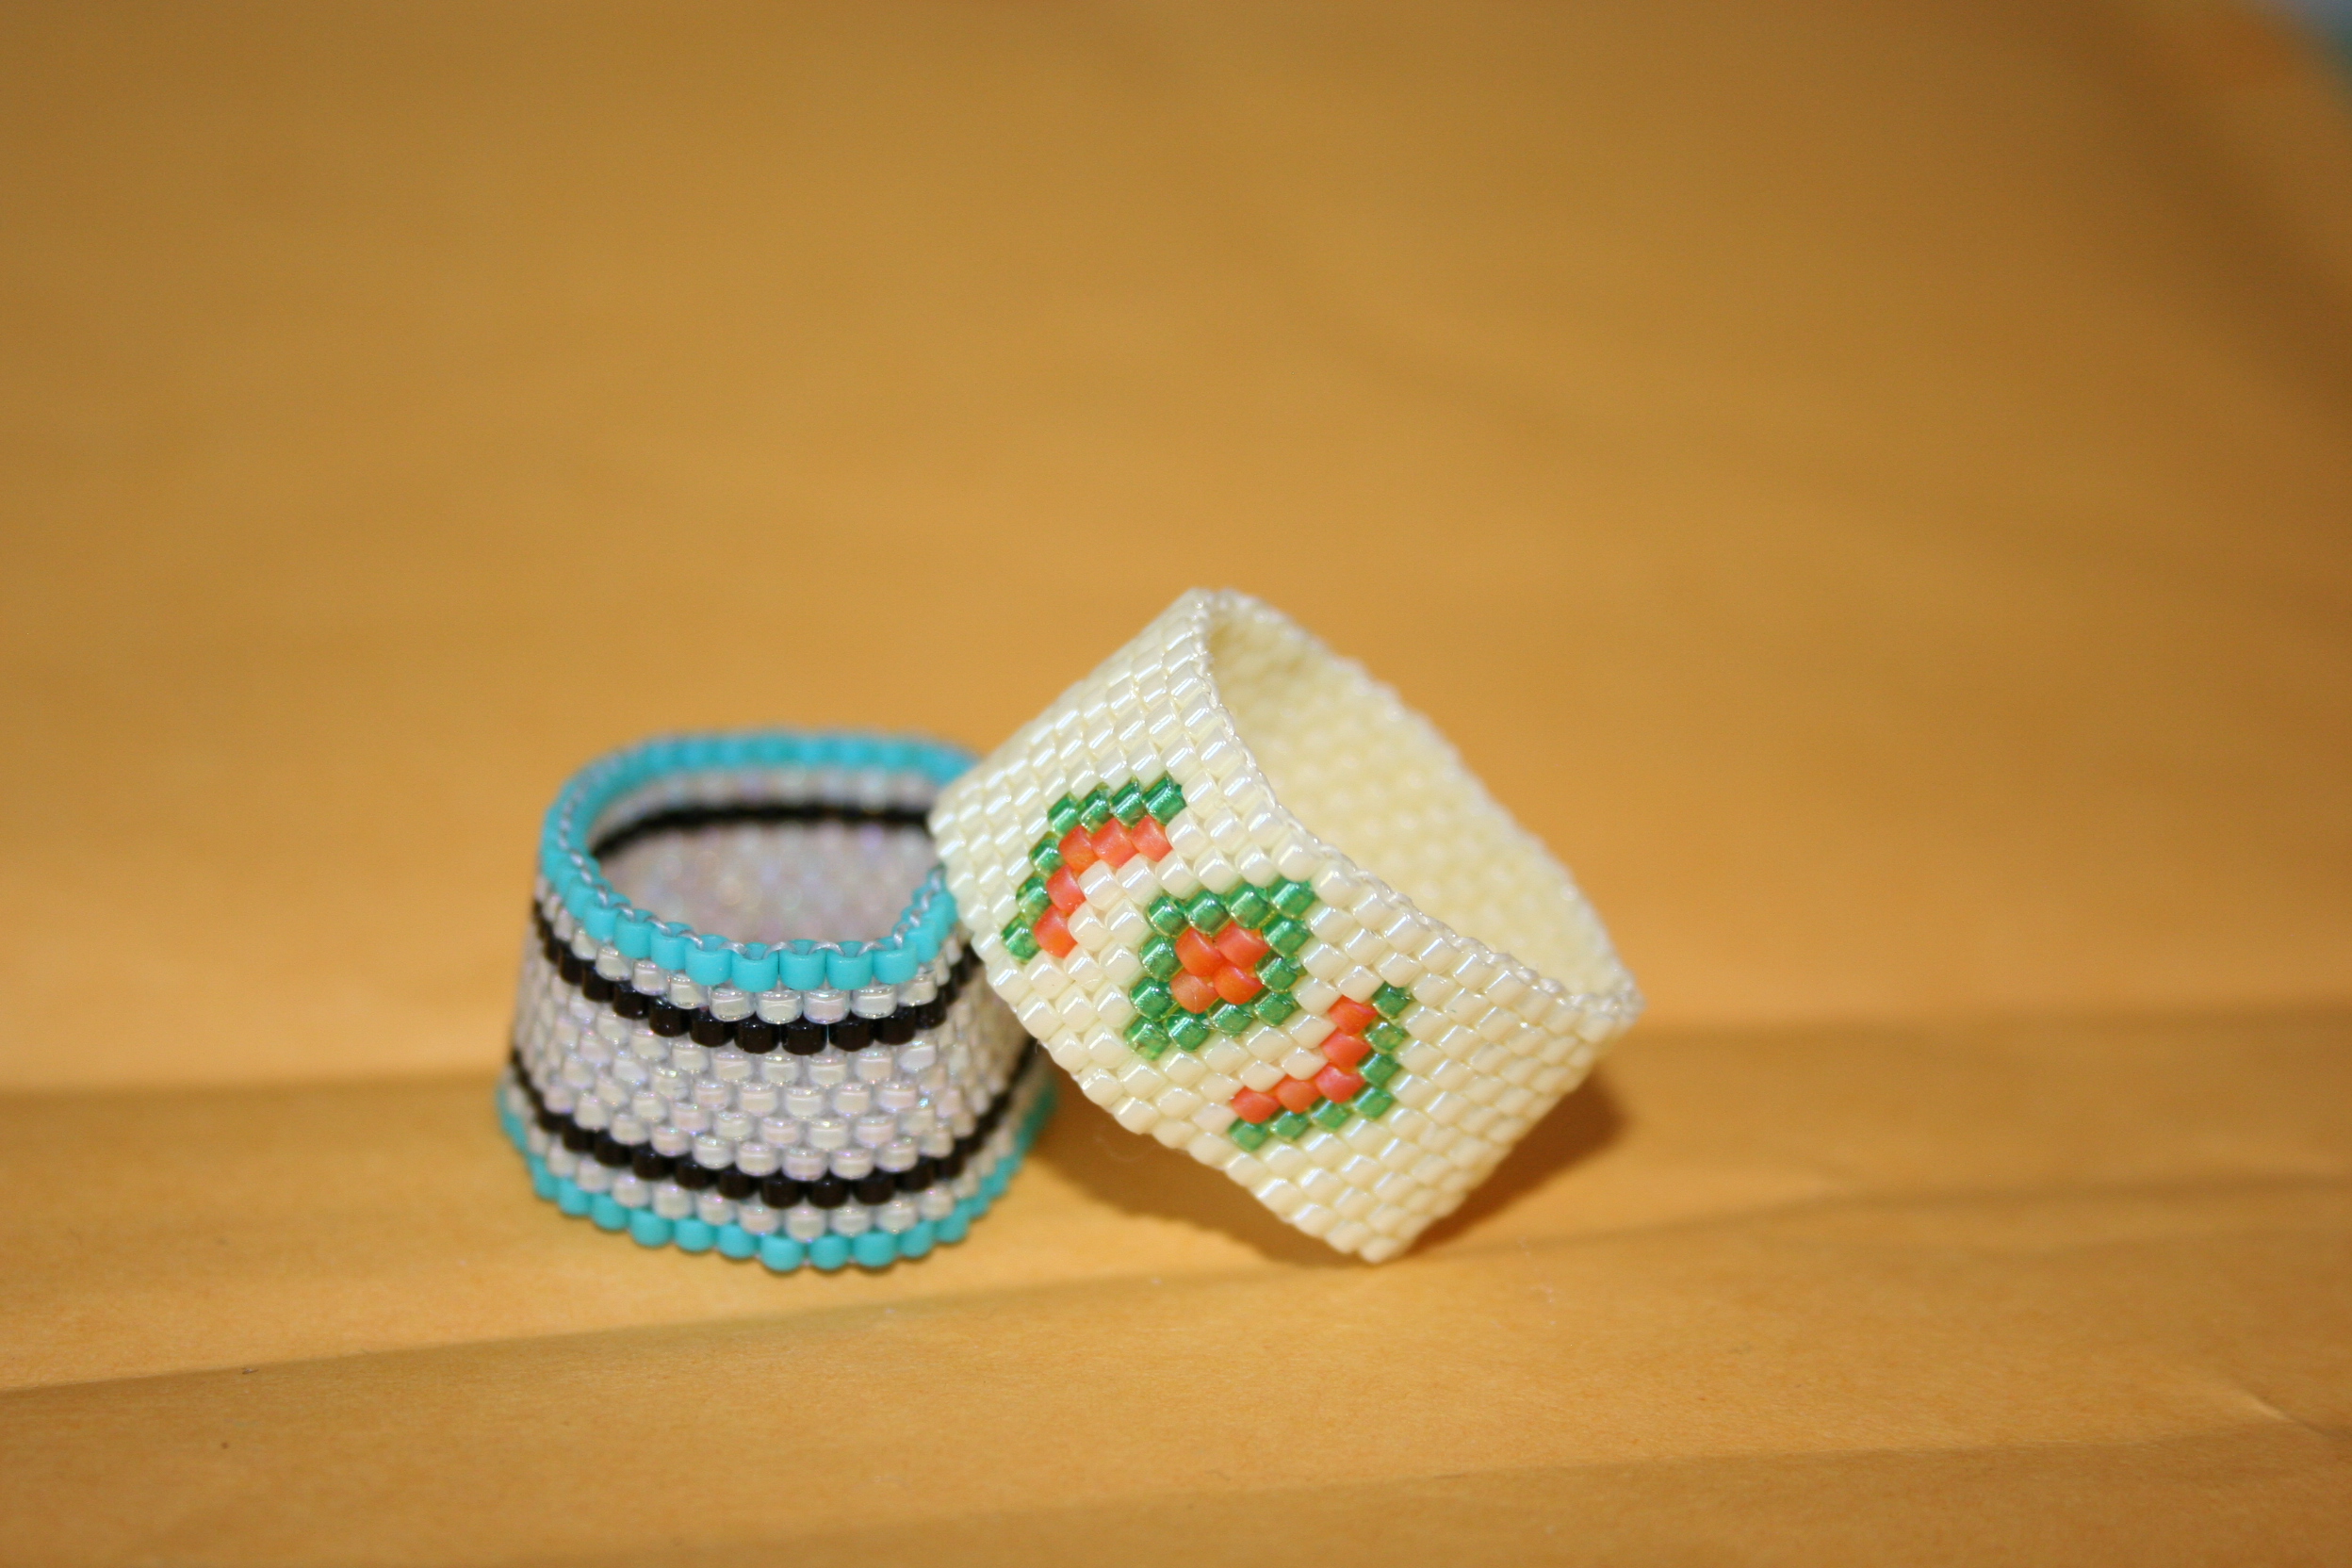 Image of two beaded rings made using peyote stitch. One is white with a green and orange geometric design, and the other has blue, black and white stripes.